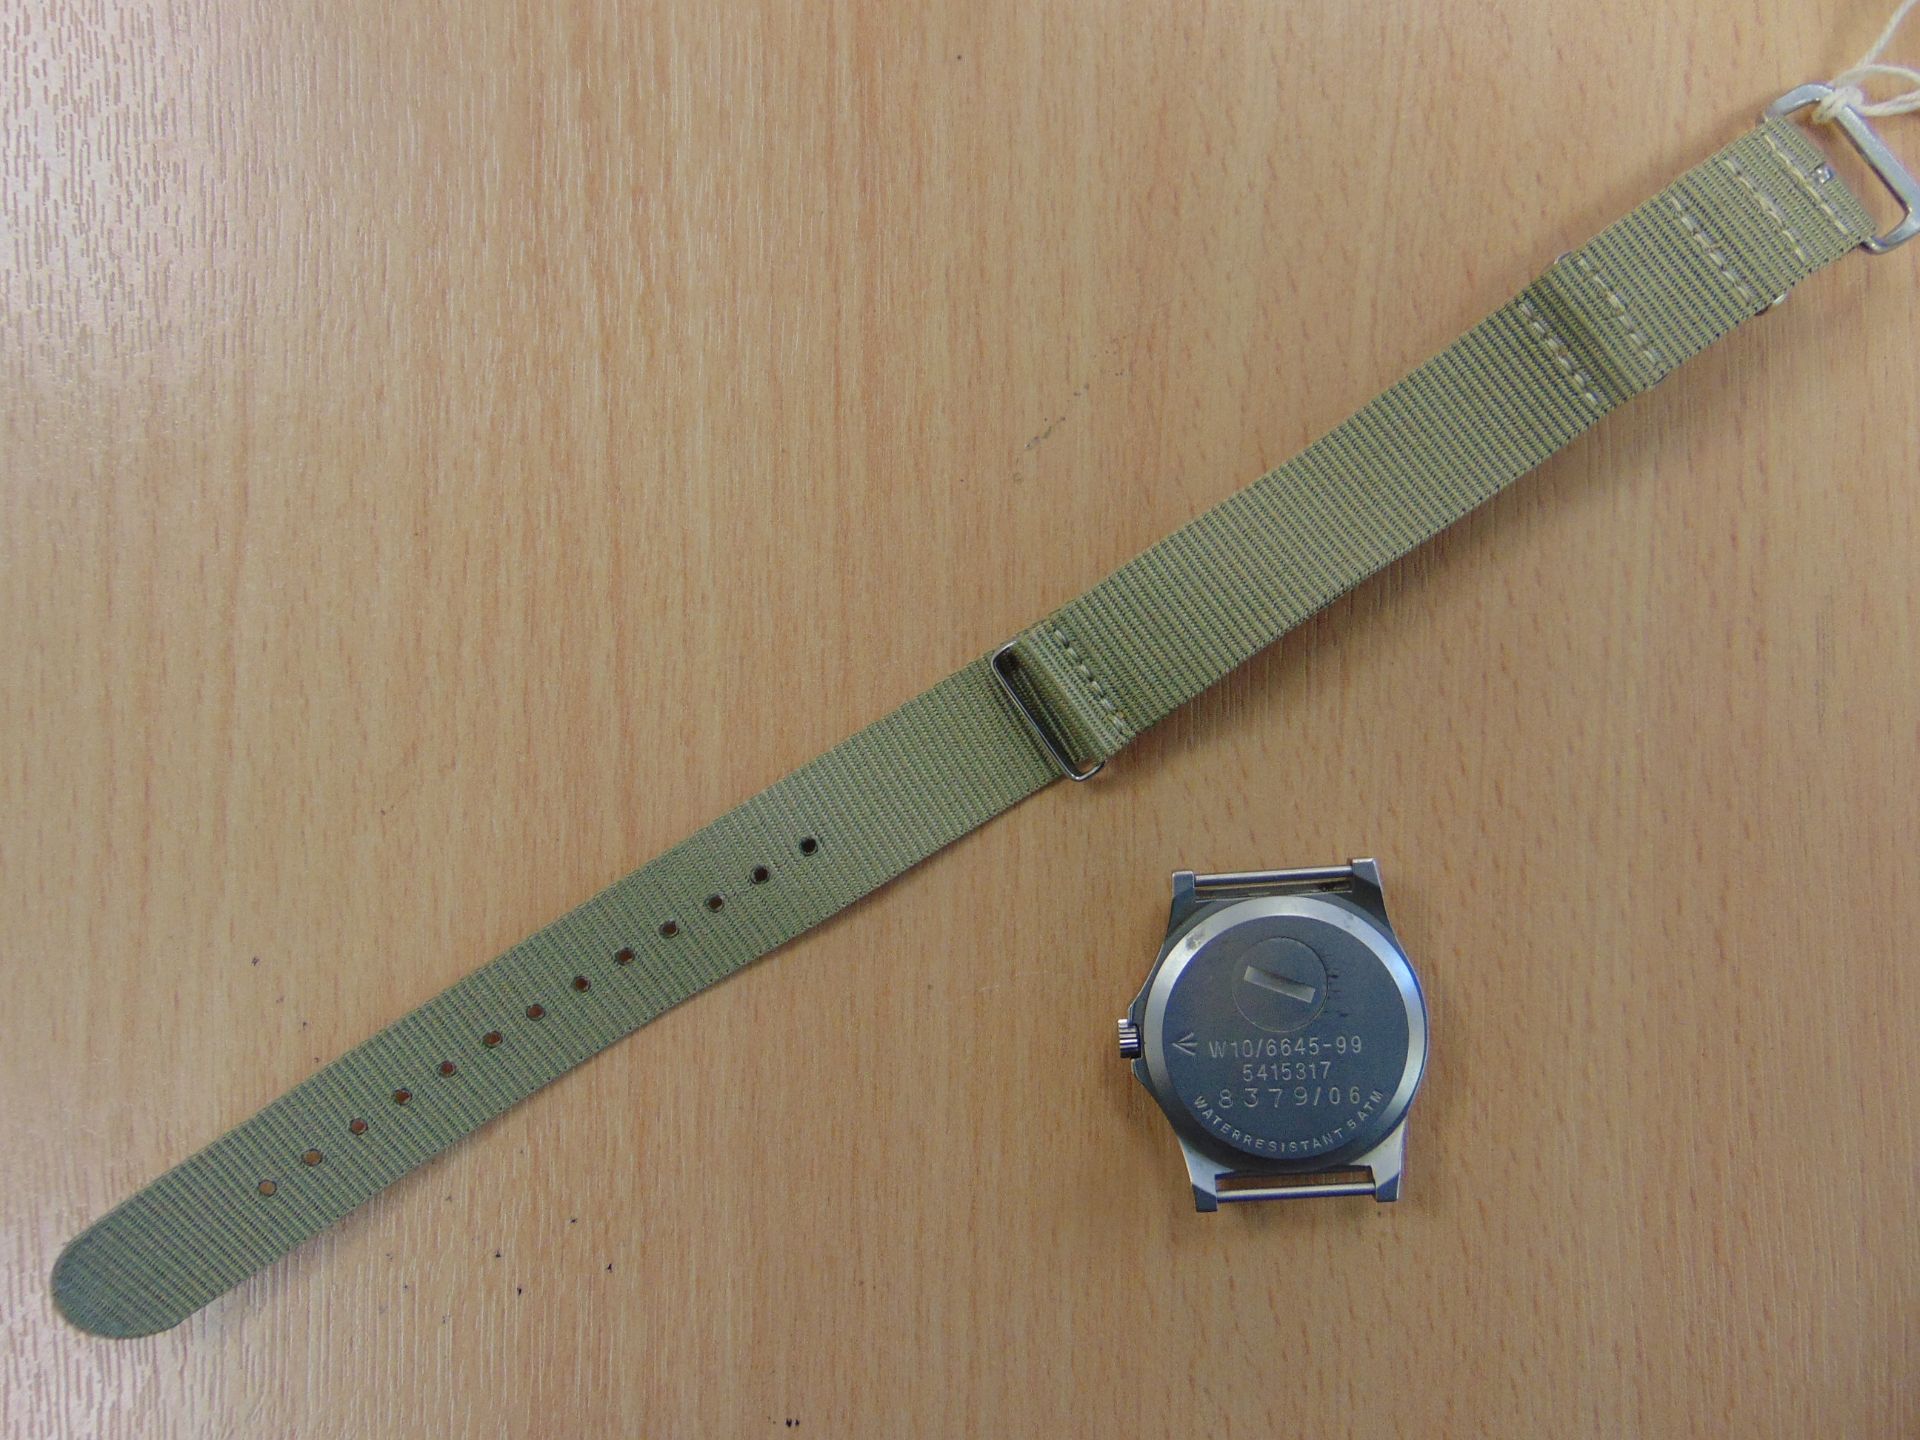 VERY NICE CWC W10 SERVICE WATCH WATER PROOF TO 5 ATM NATO MARKED DATED 2006 - Image 12 of 12